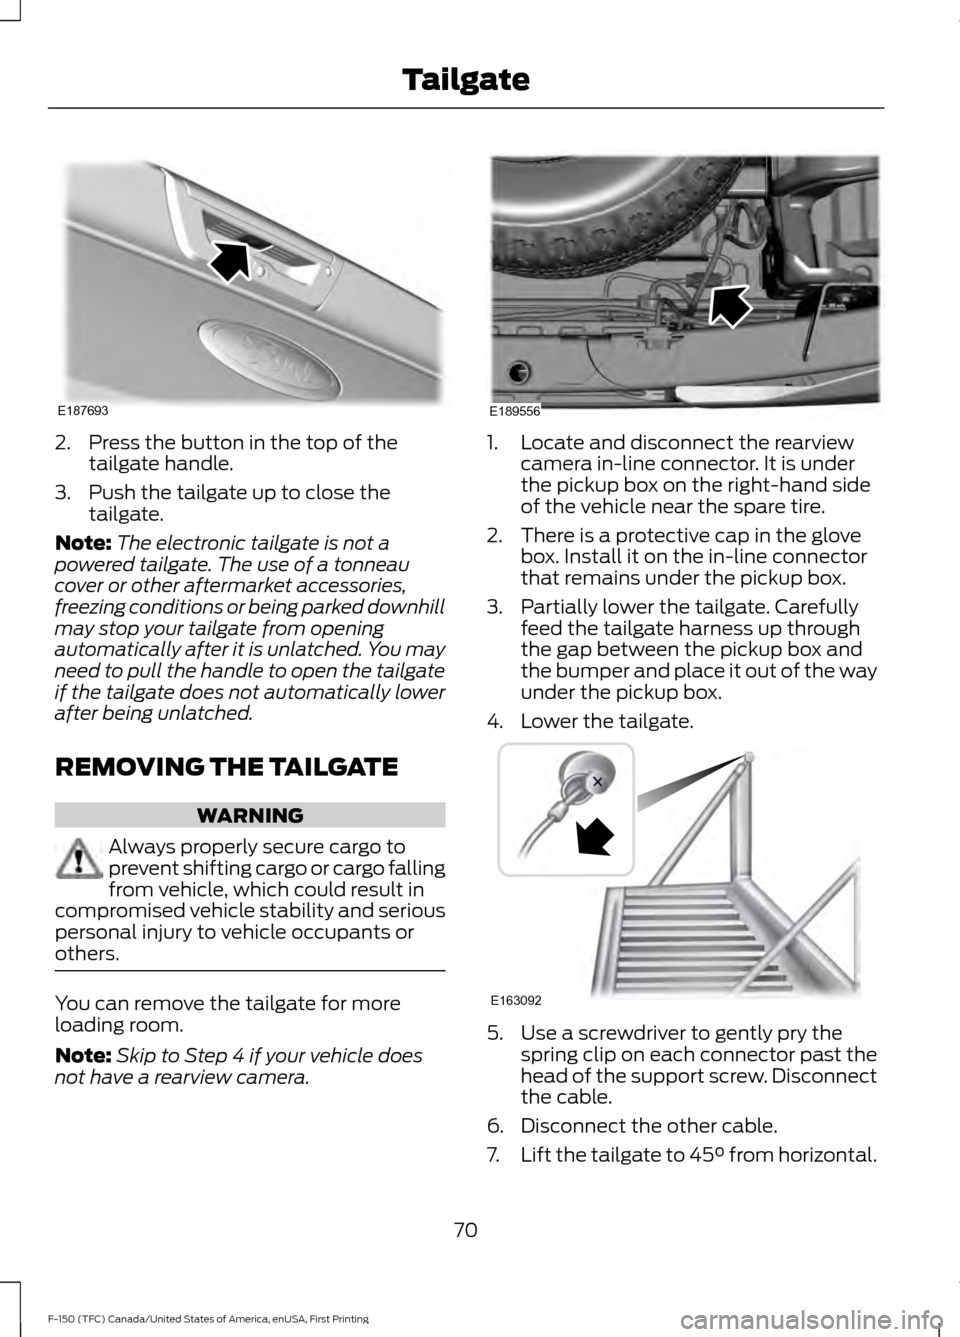 FORD F150 2017 13.G Owners Manual 2. Press the button in the top of the
tailgate handle.
3. Push the tailgate up to close the tailgate.
Note: The electronic tailgate is not a
powered tailgate. The use of a tonneau
cover or other after